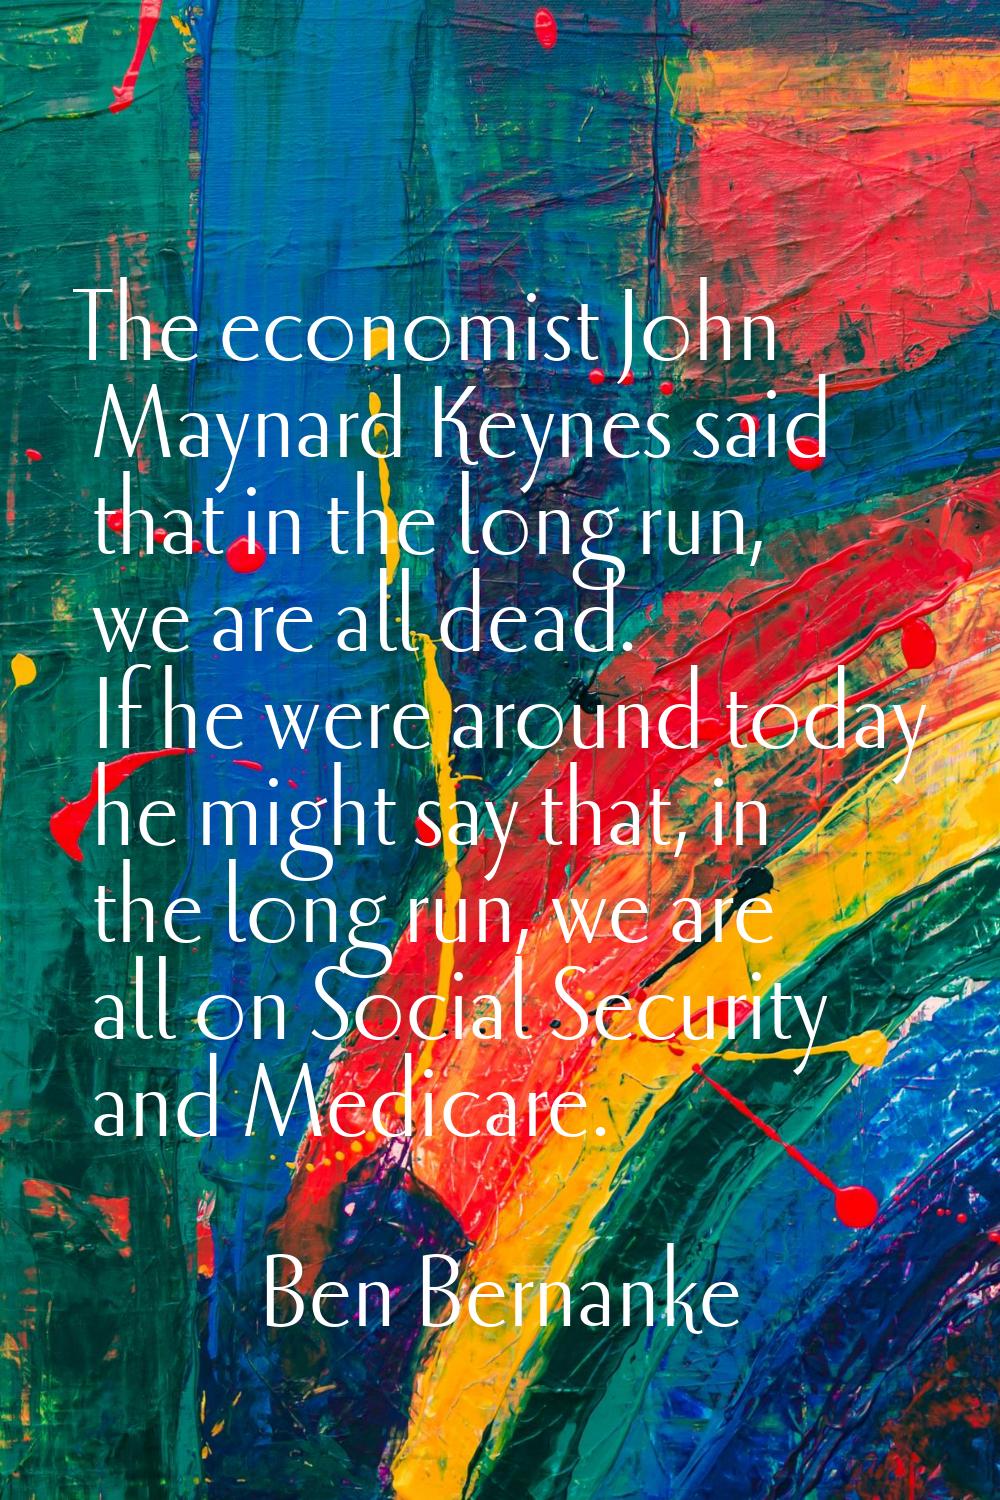 The economist John Maynard Keynes said that in the long run, we are all dead. If he were around tod